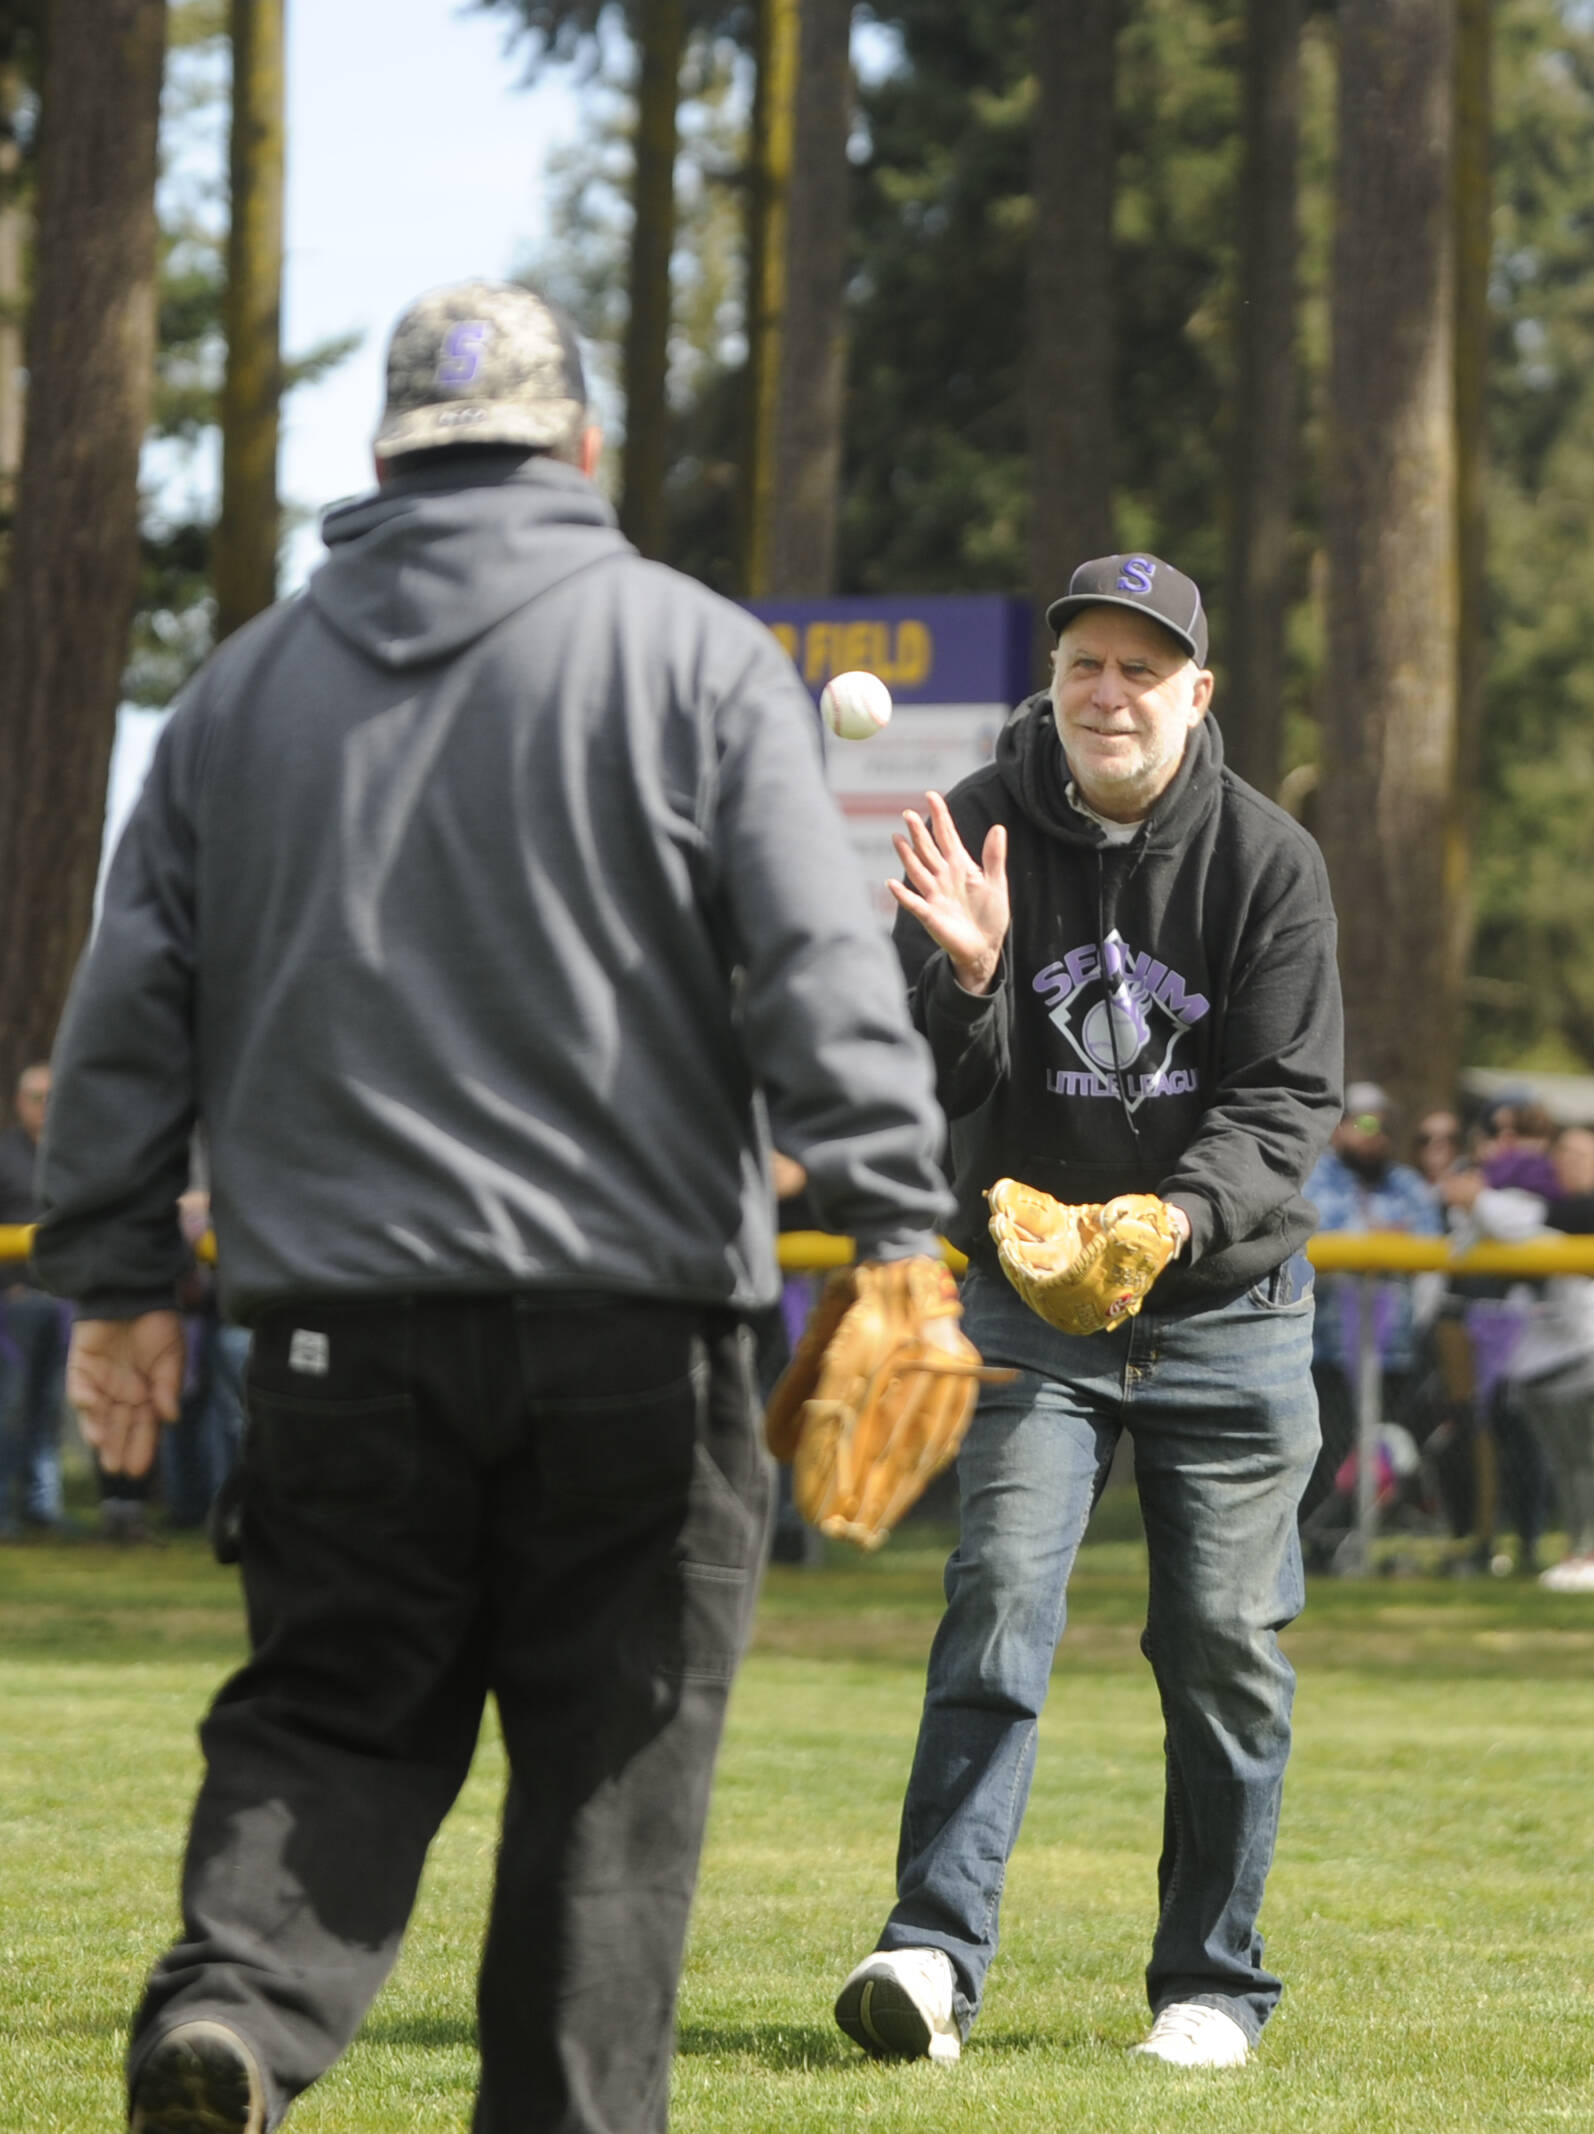 Volunteer Kris Lether, right, gets the ball back from Tony Knapp after throwing out the first pitch at the Sequim Little League Opening Day event on Saturday.